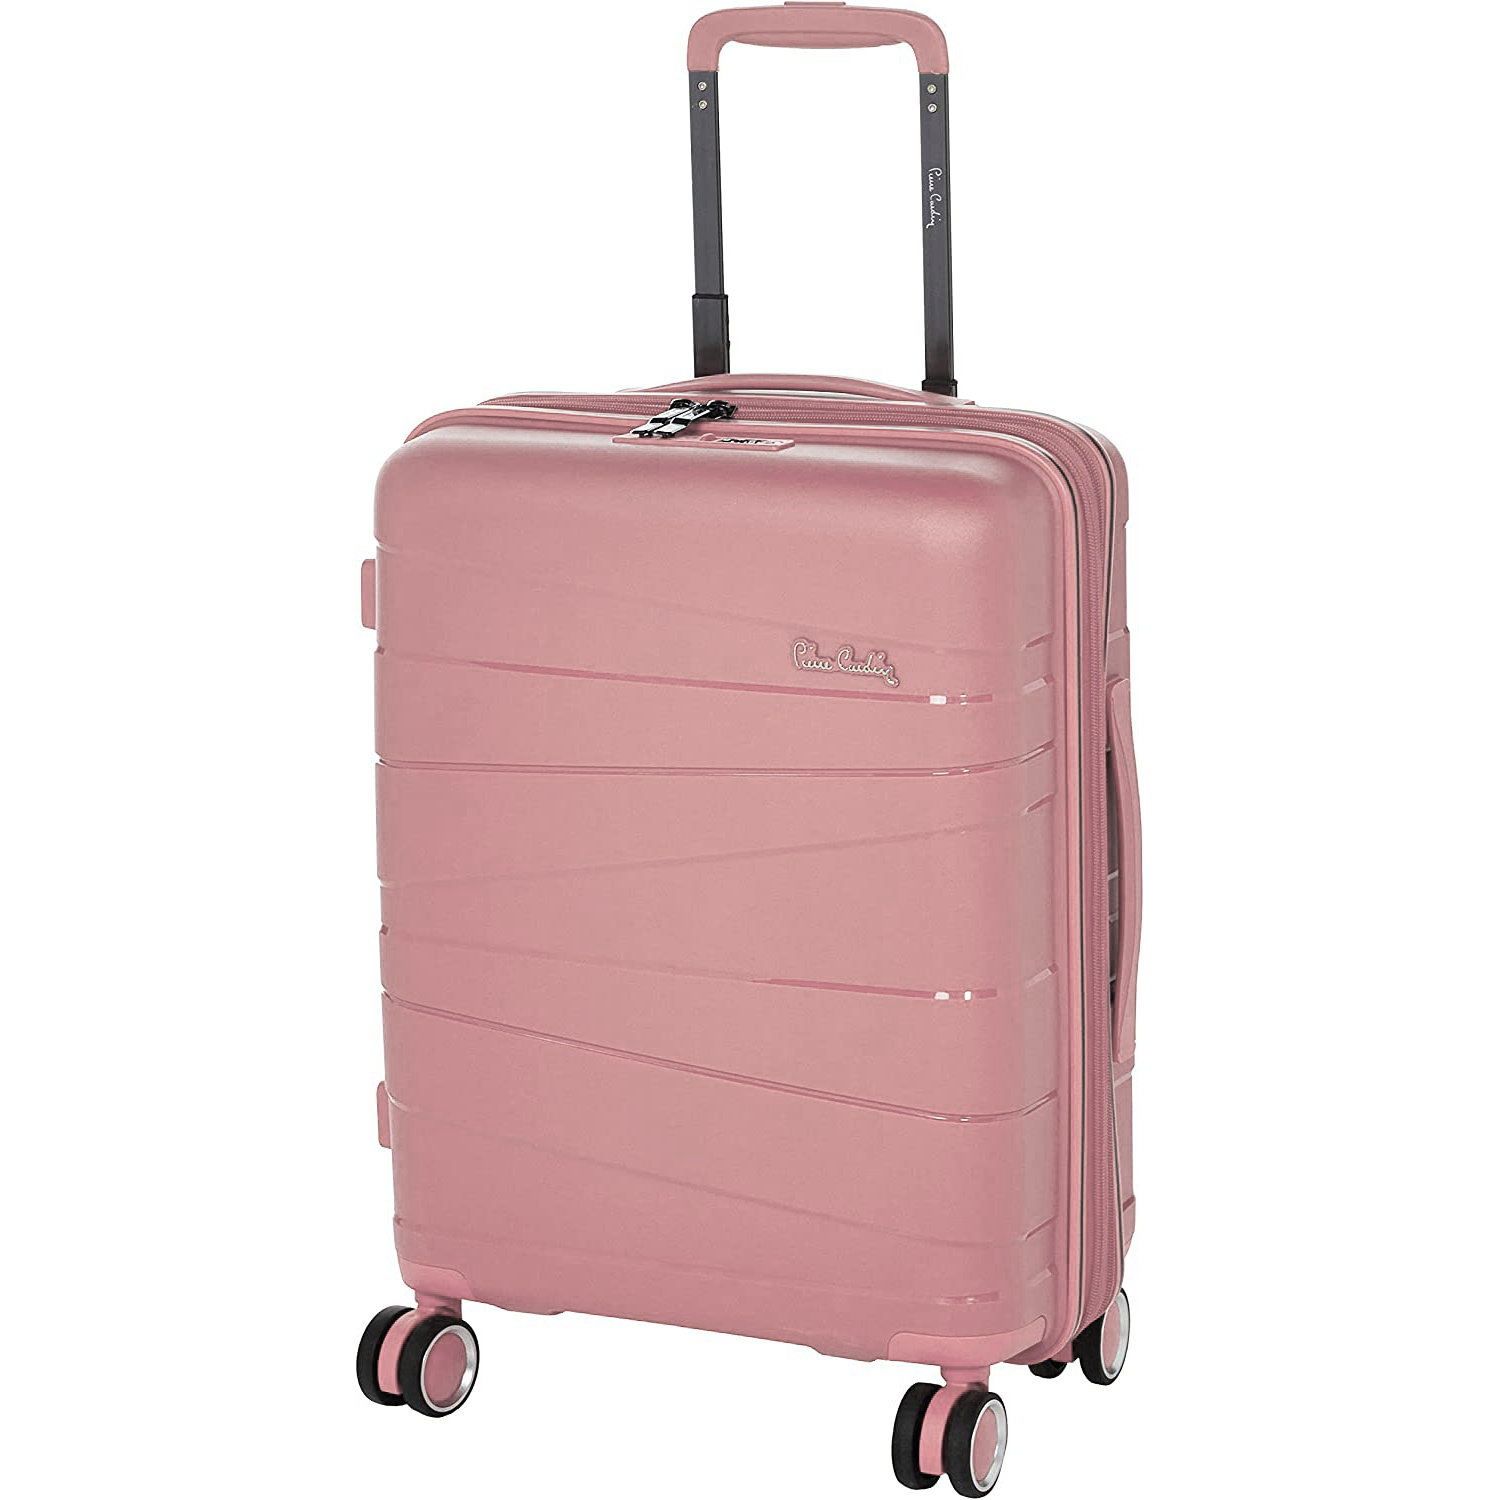 Pierre Cardin Zurich Collection Carry On - Rose Gold